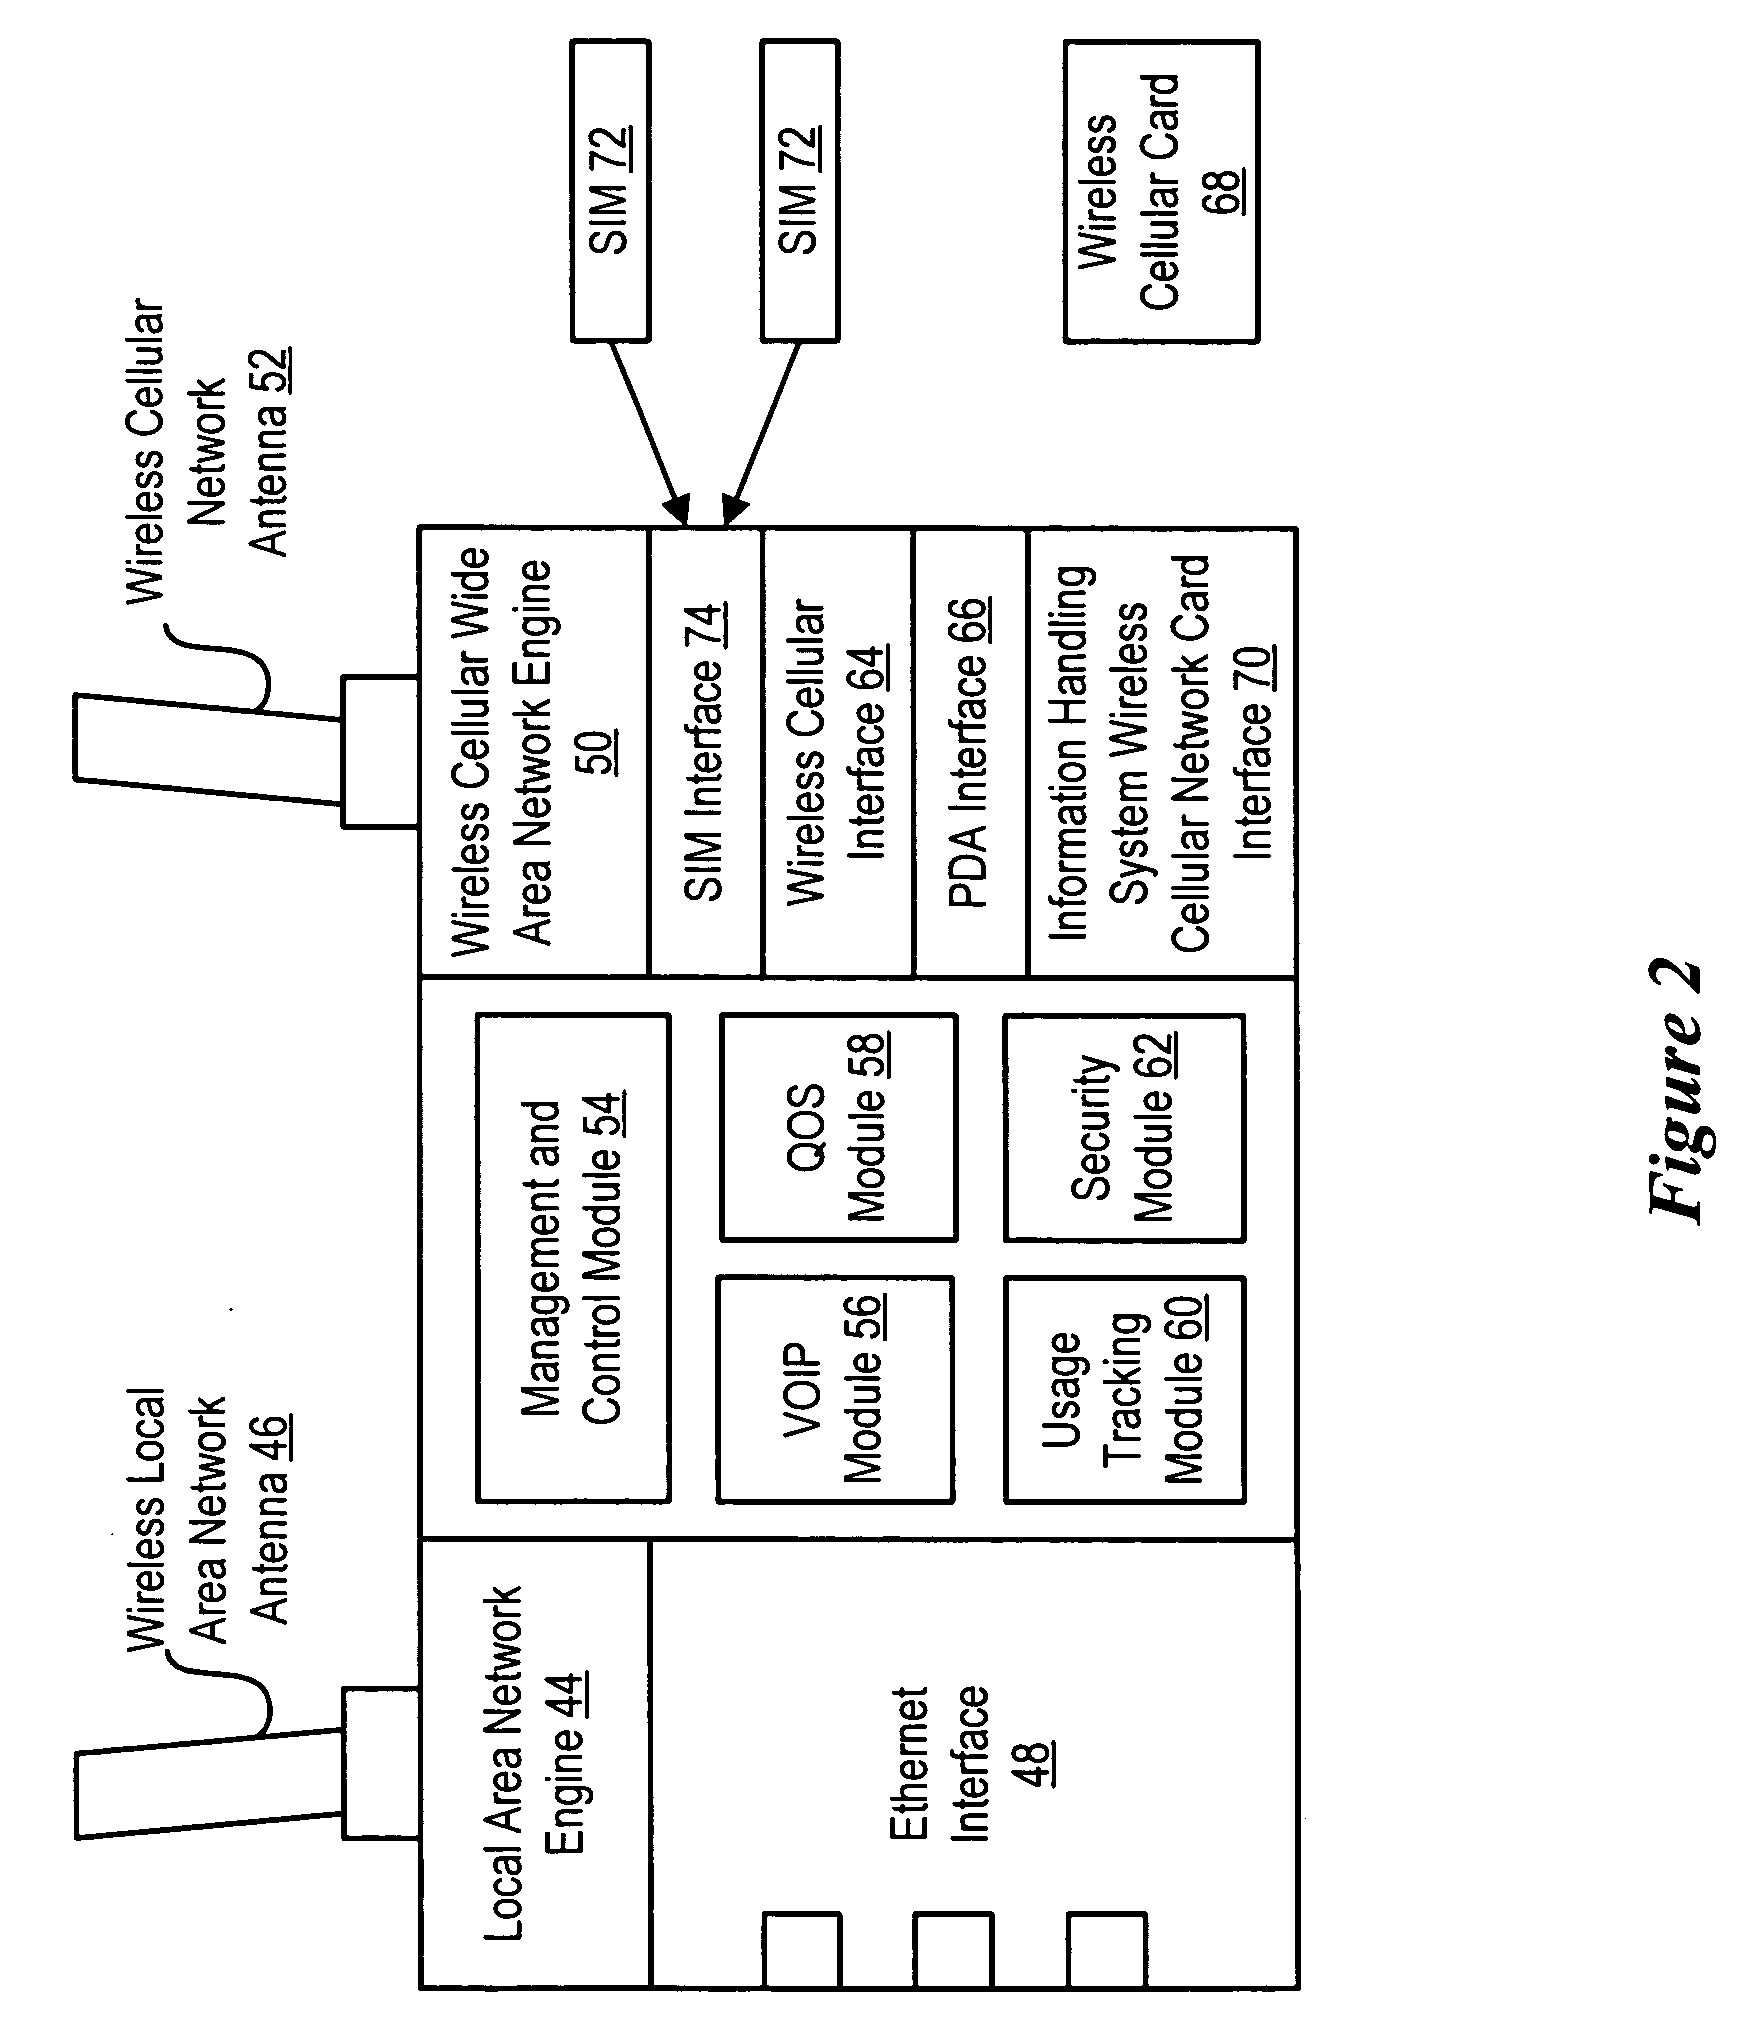 System and method for wireless cellular enabled information handling system router